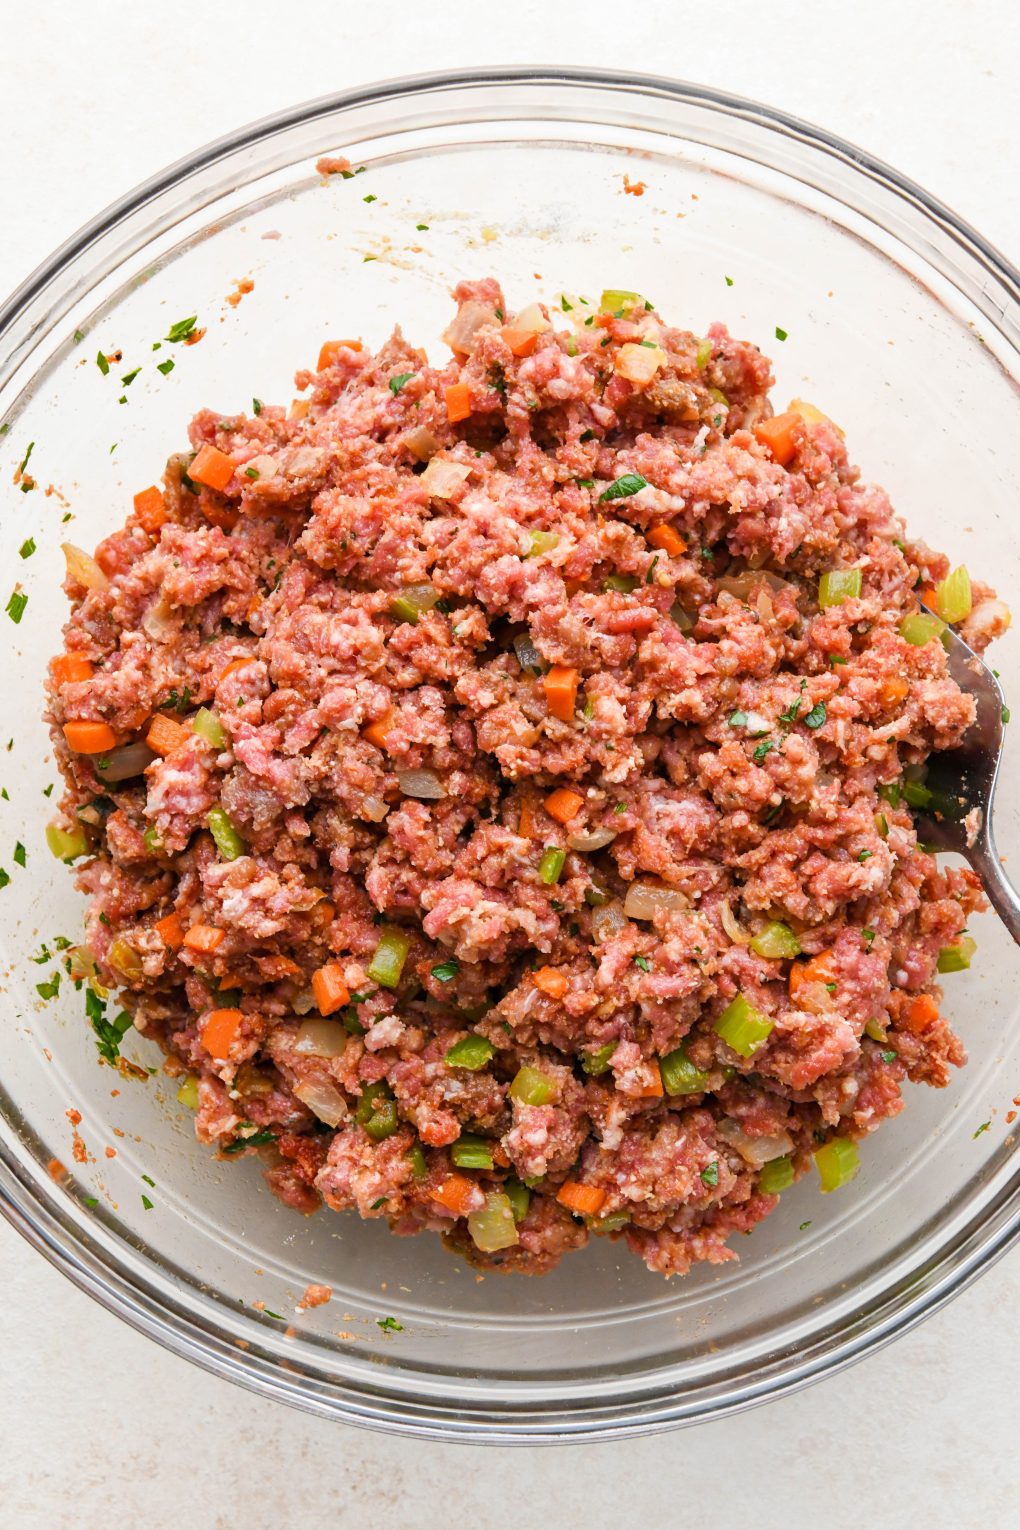 How to make classic Whole30 meatloaf: All ingredients mixed together in a large glass bowl.